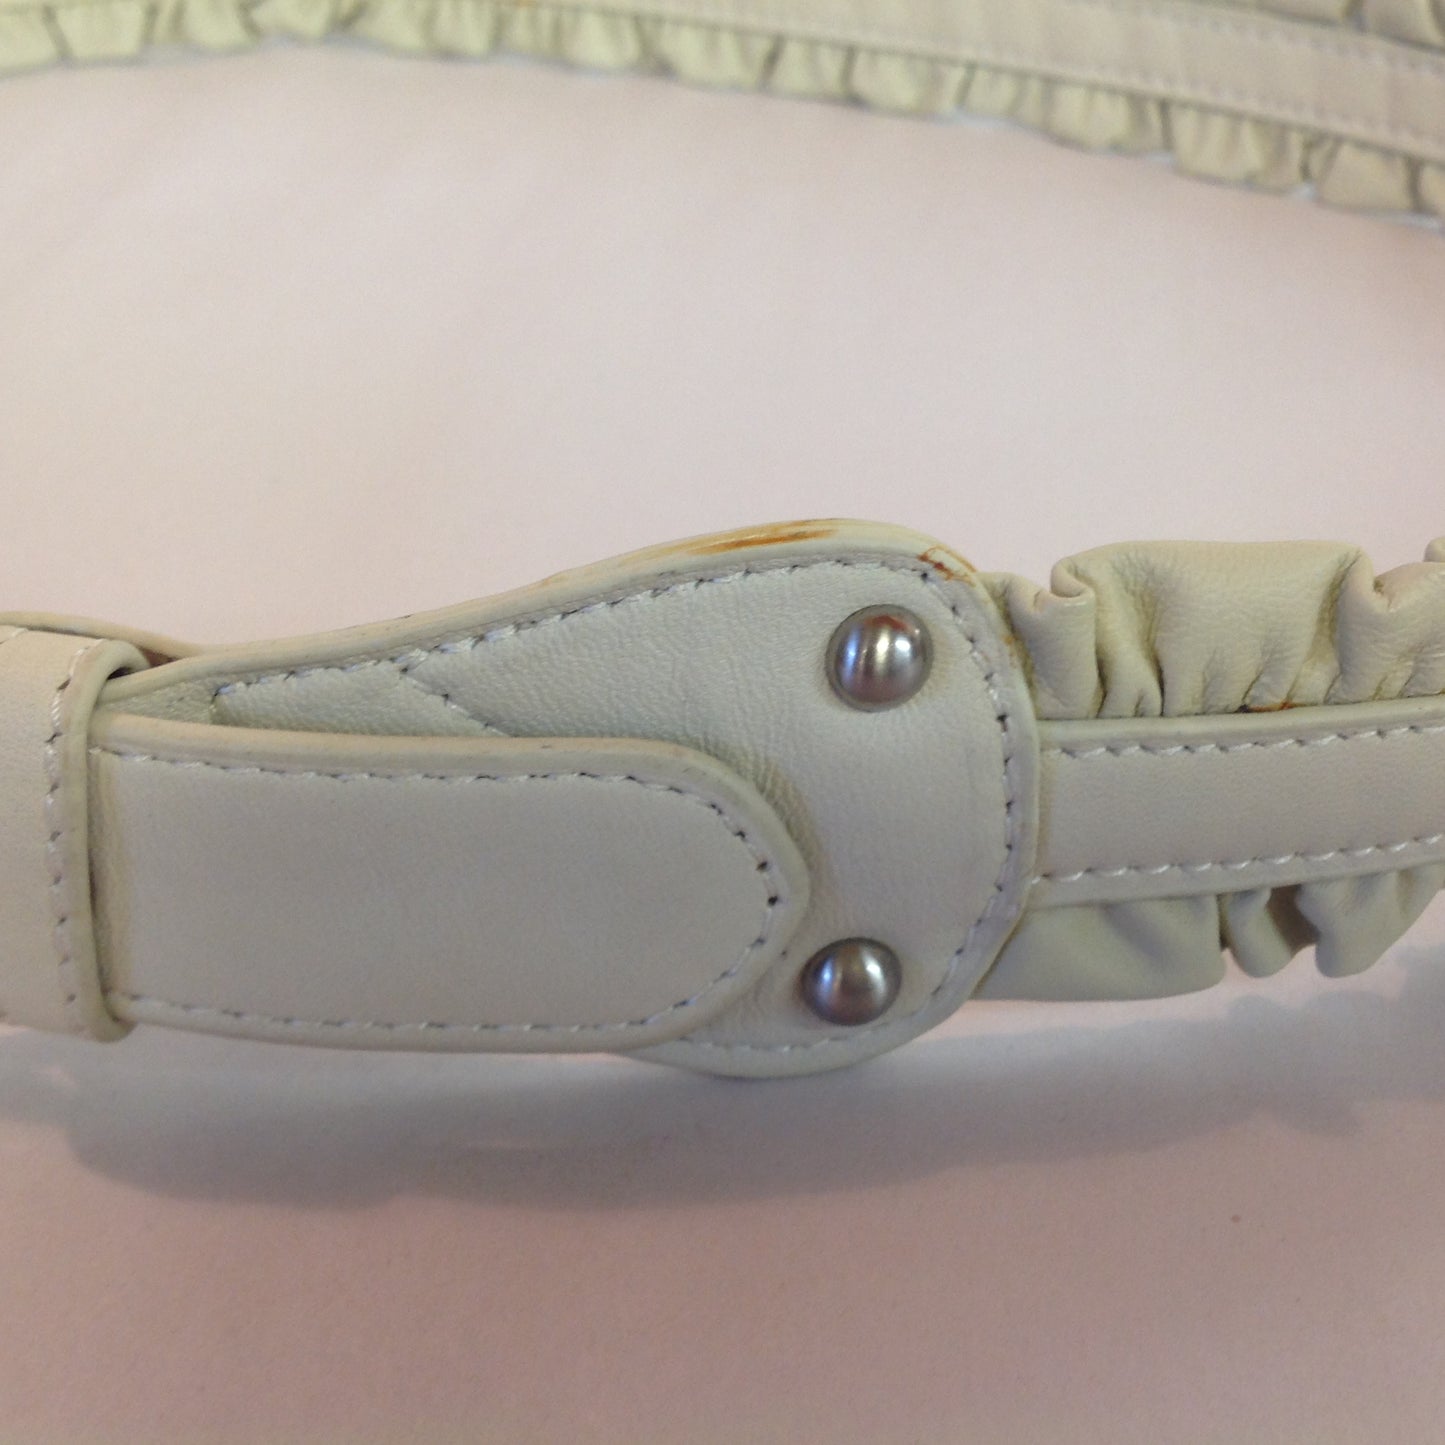 Light Tan XL Women's Coldwater Creek Ruffled Leather Belt with Tags 5